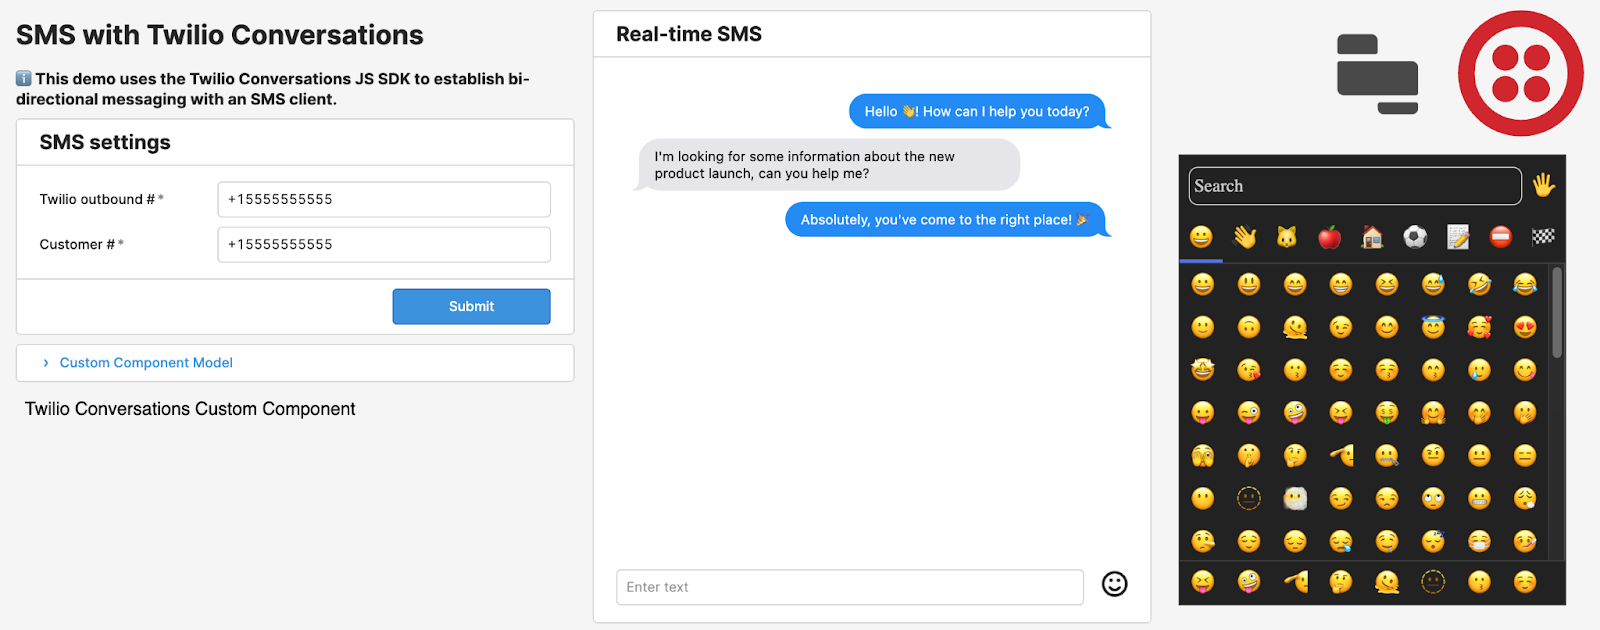 A user interface screenshot showing an in-progress chat conversation between a customer and an agent. SMS settings are displayed on the left, a chat window is displayed in the middle, and an emoji picker is displayed on the right.